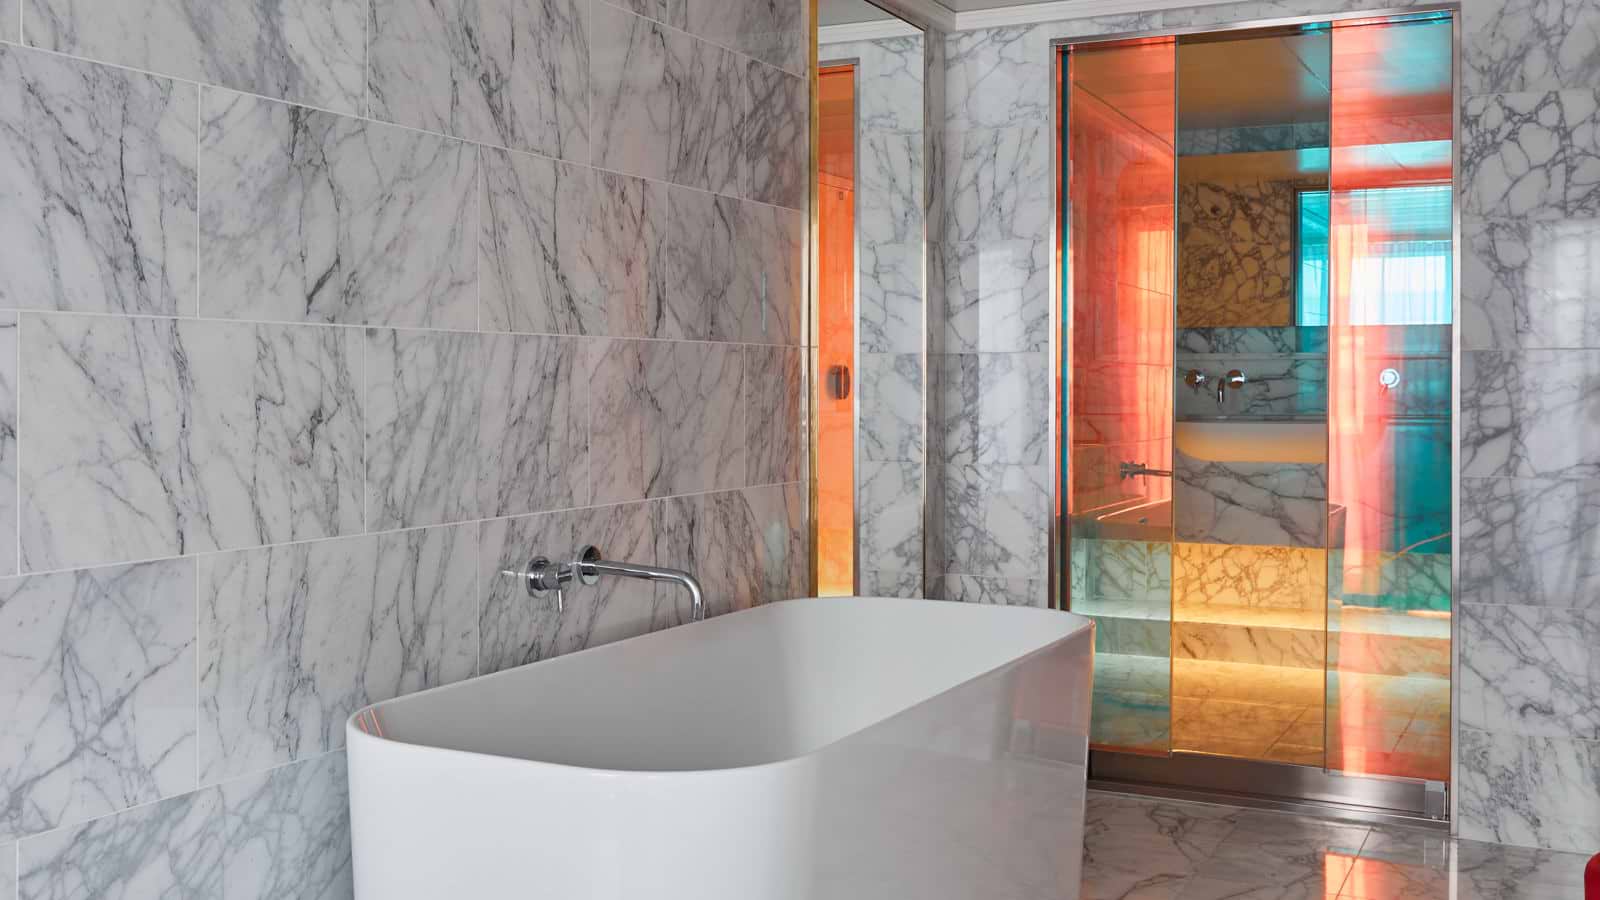 The Massive Suite features 1.5 baths, a standalone tub, floor-to-ceiling marble, and dichroic finishings, plus an (extra) roomy Peek-a-View Shower.